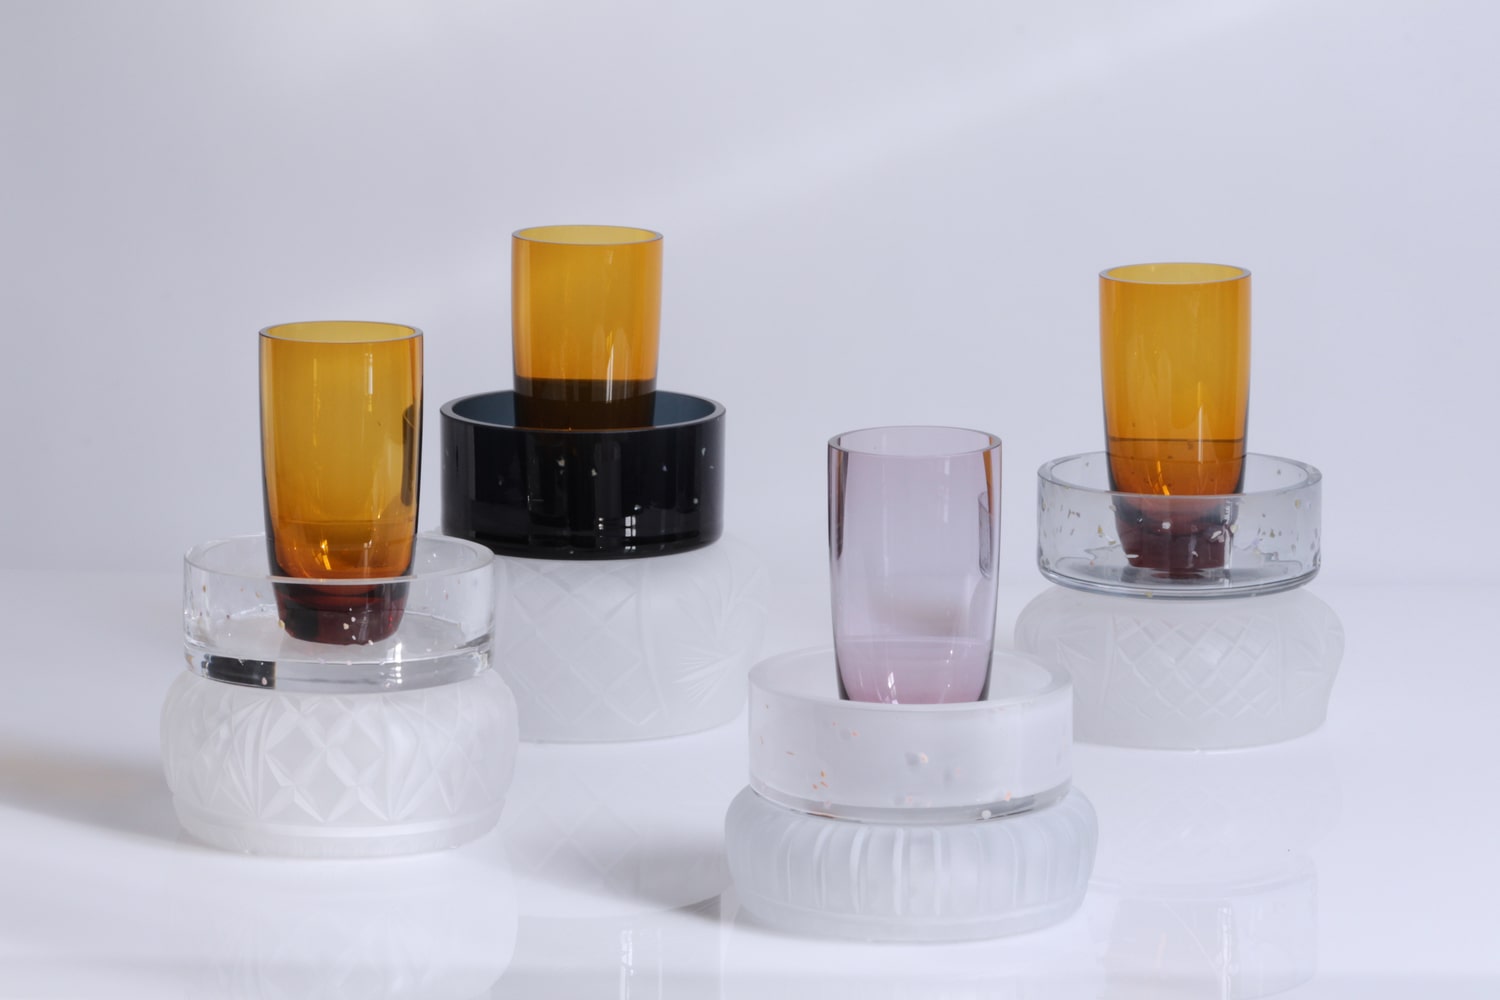 Lotus Symbols of now glass object from Heritage Contemporary collection design by Jiri Krejcirik Studio View